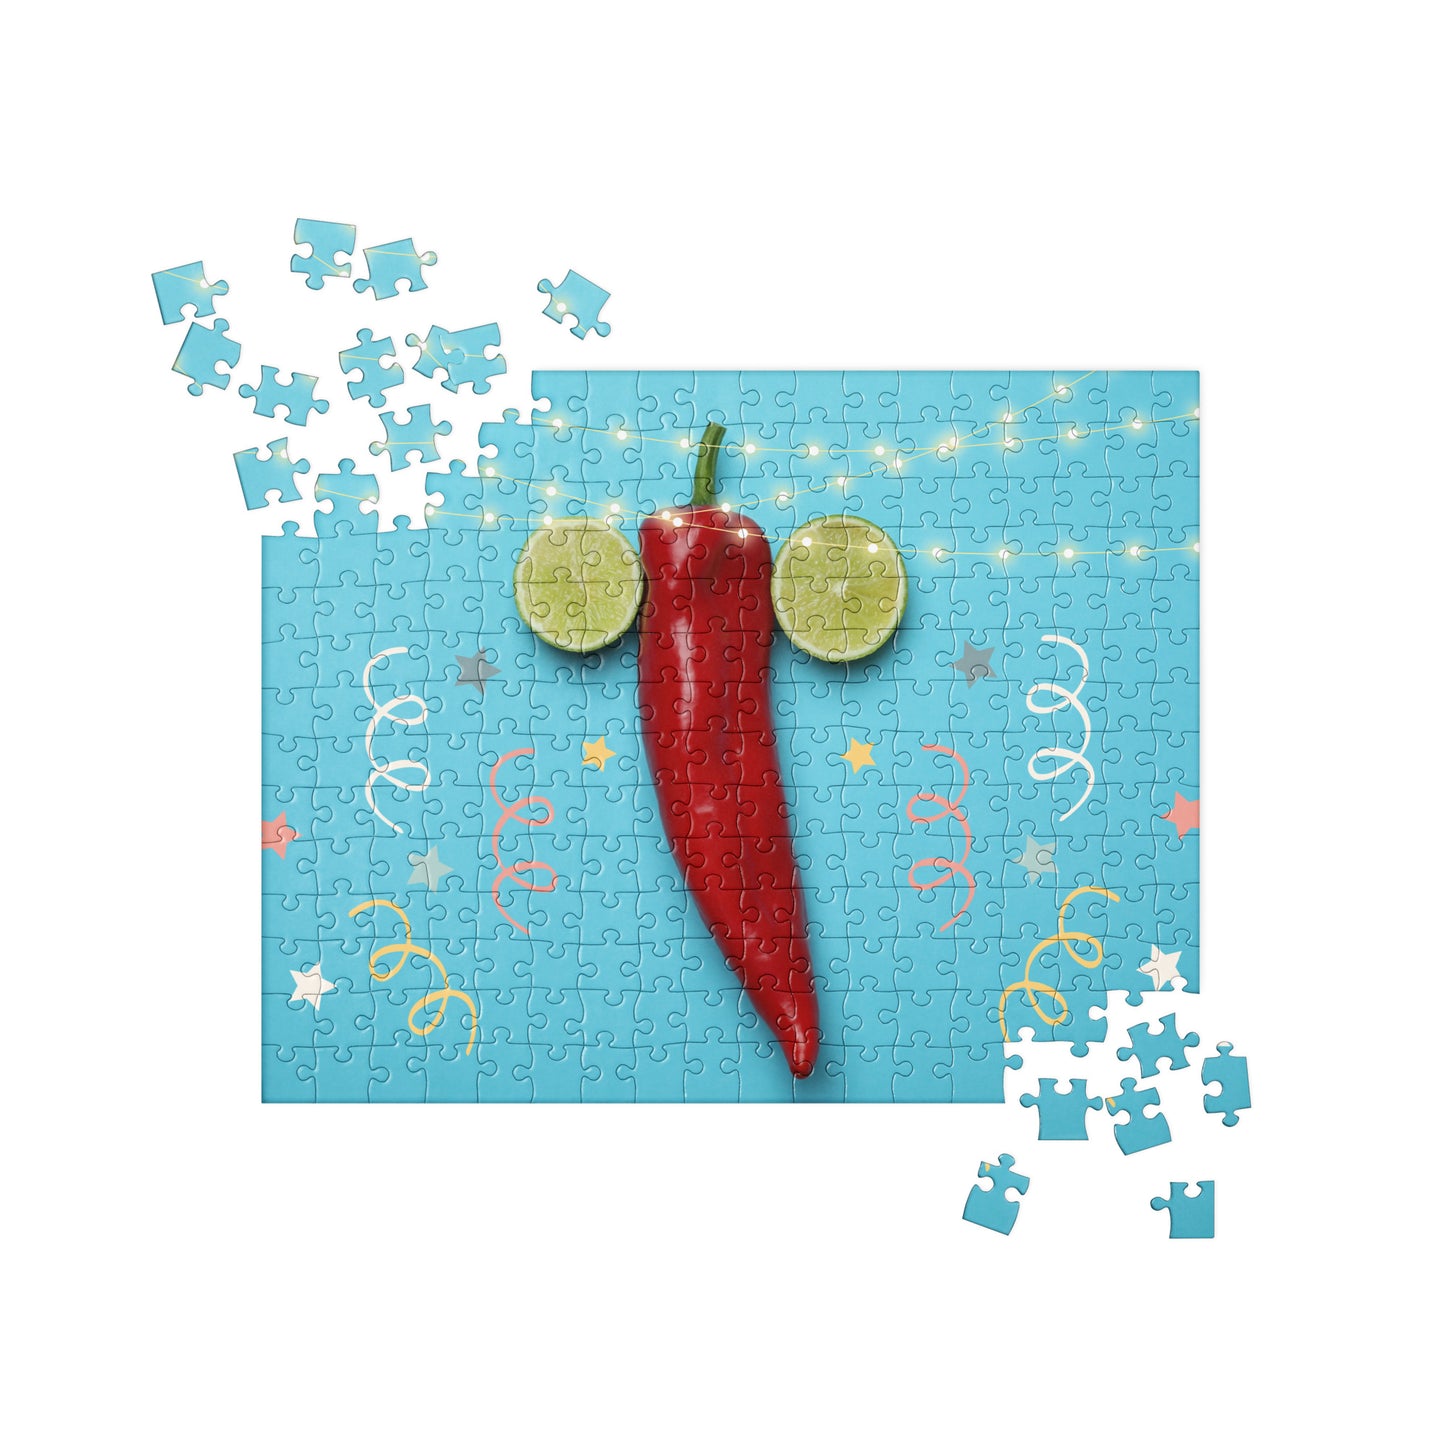 Sensual Jigsaw Puzzle: Chili Pepper and Limes